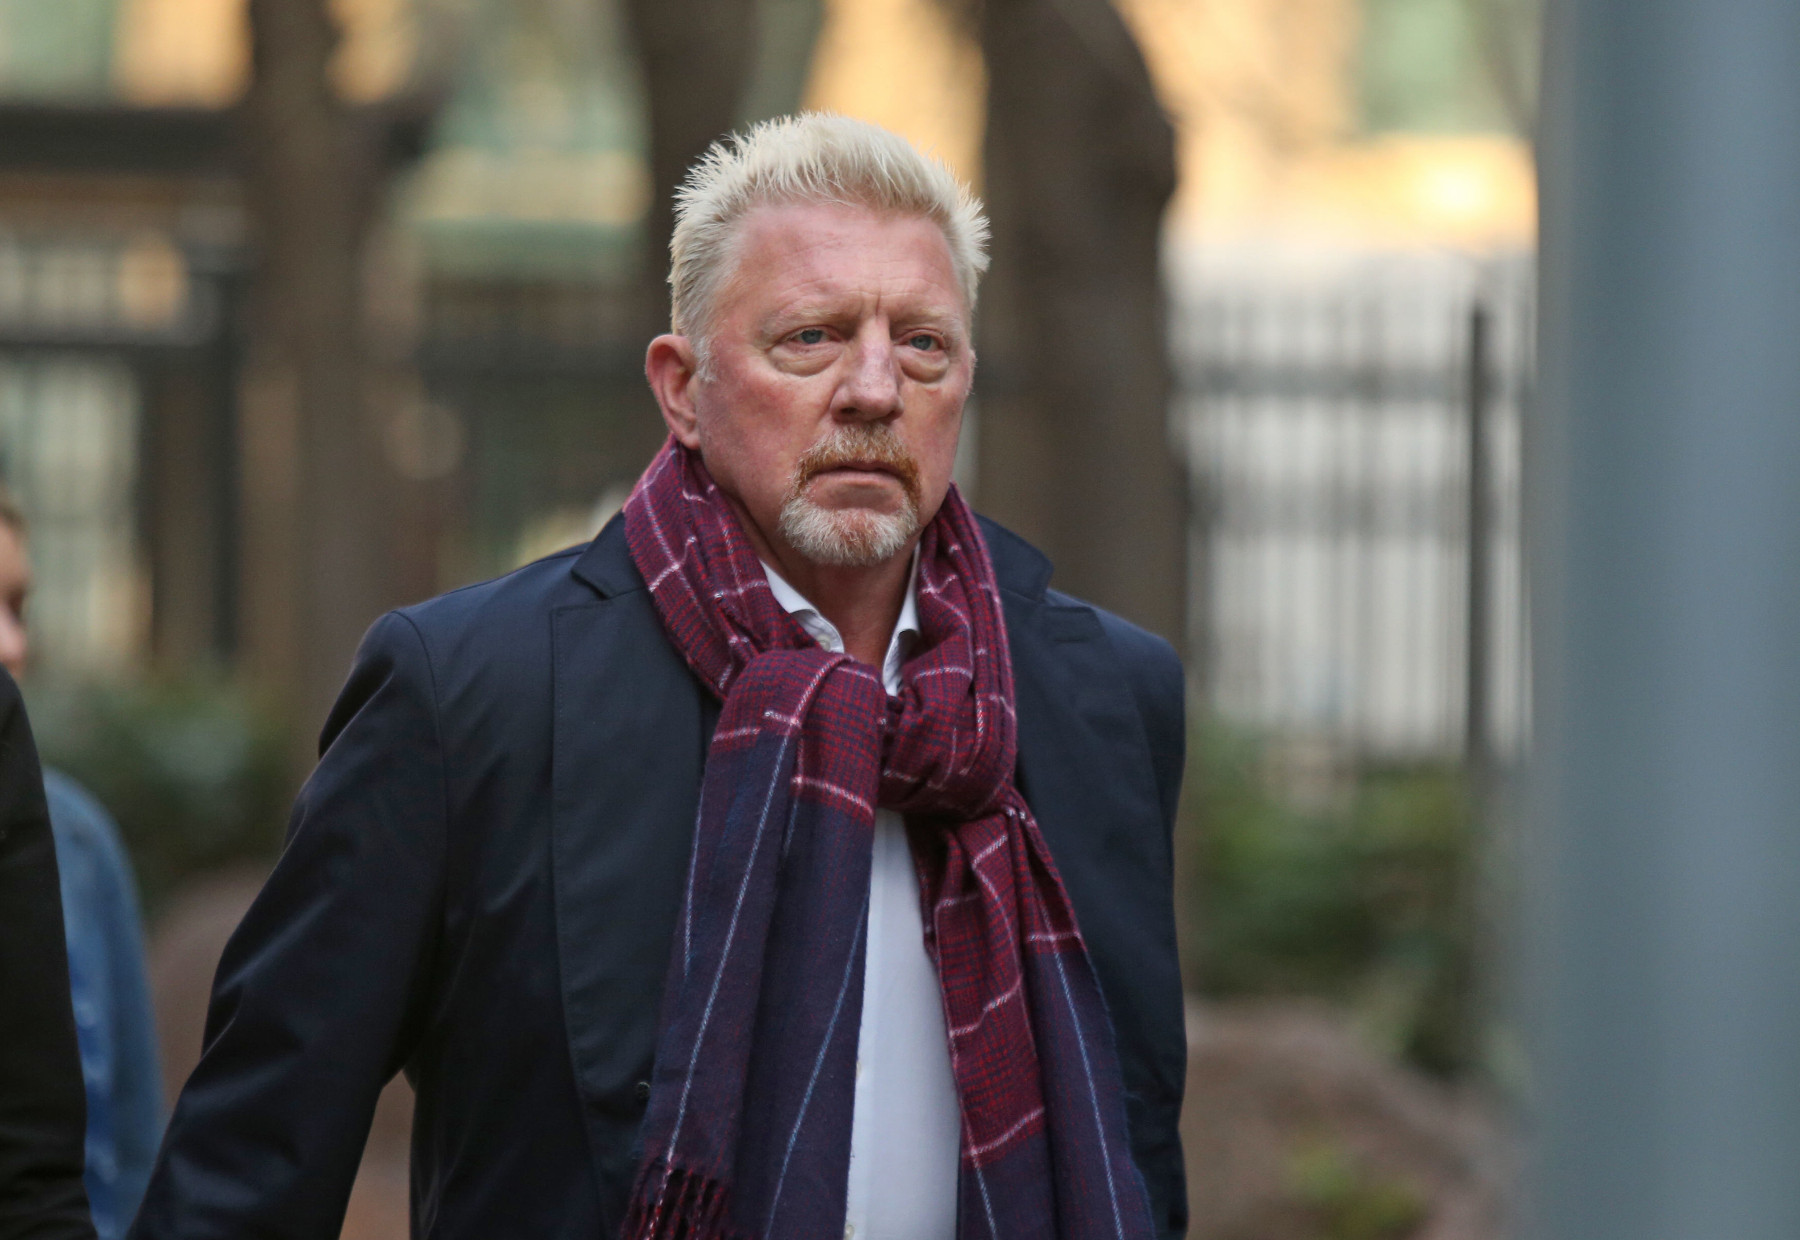 Photo of Becker 'acted dishonestly', court told